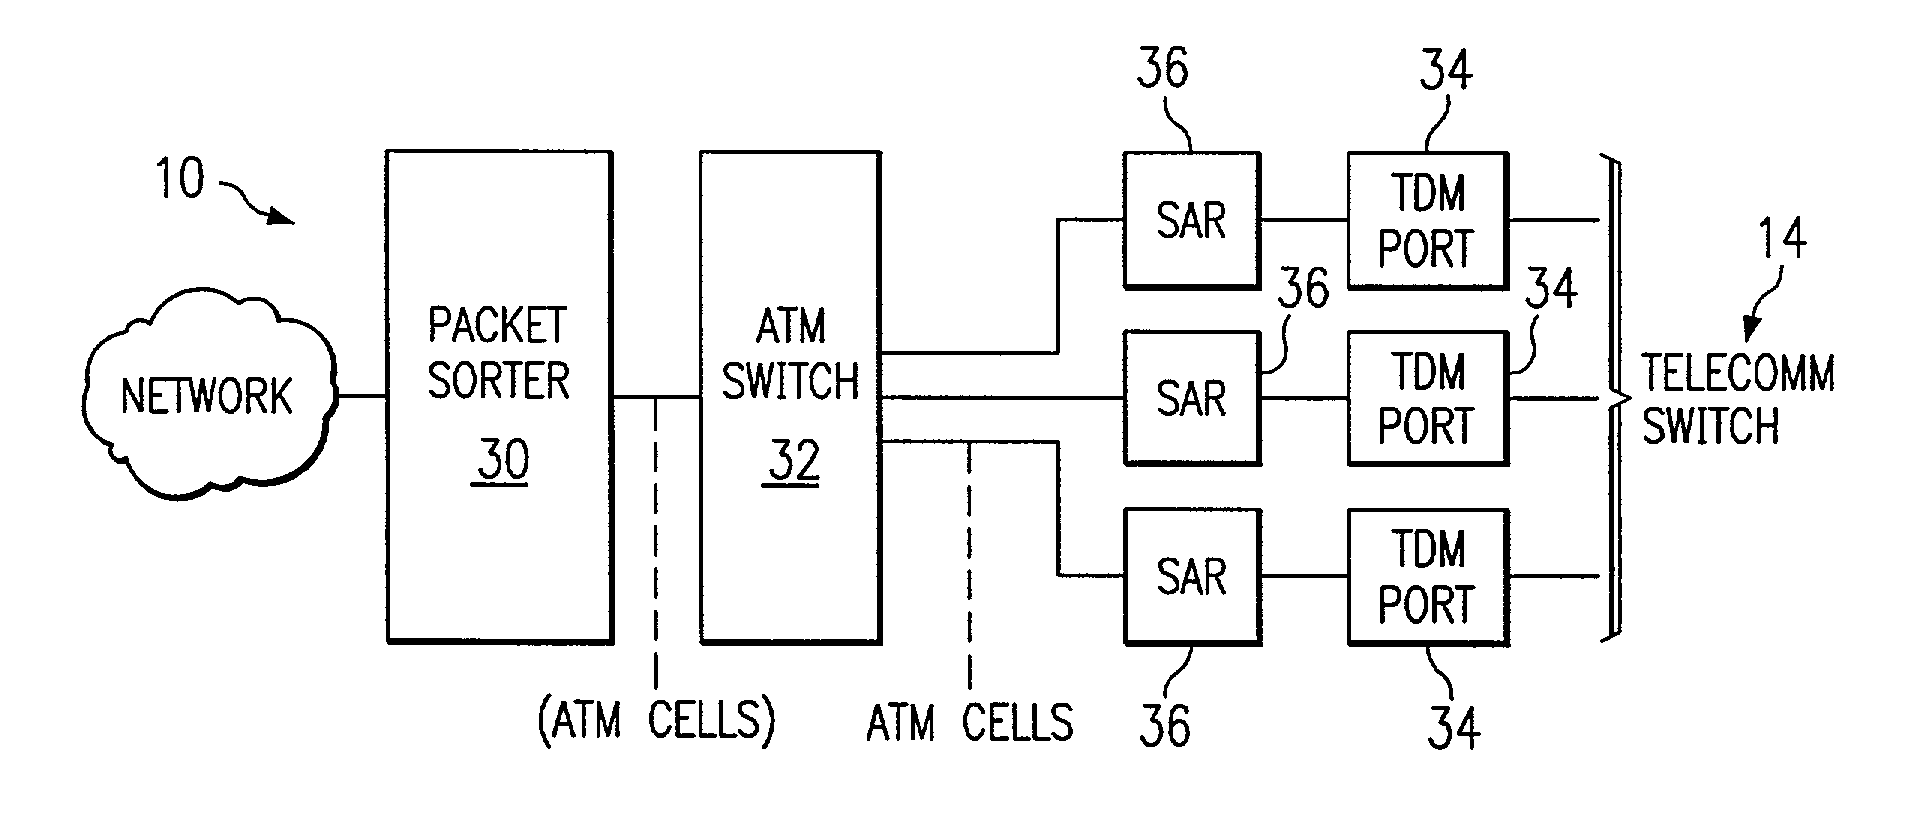 System and method for cross connecting an ATM network and a telecommunication switch